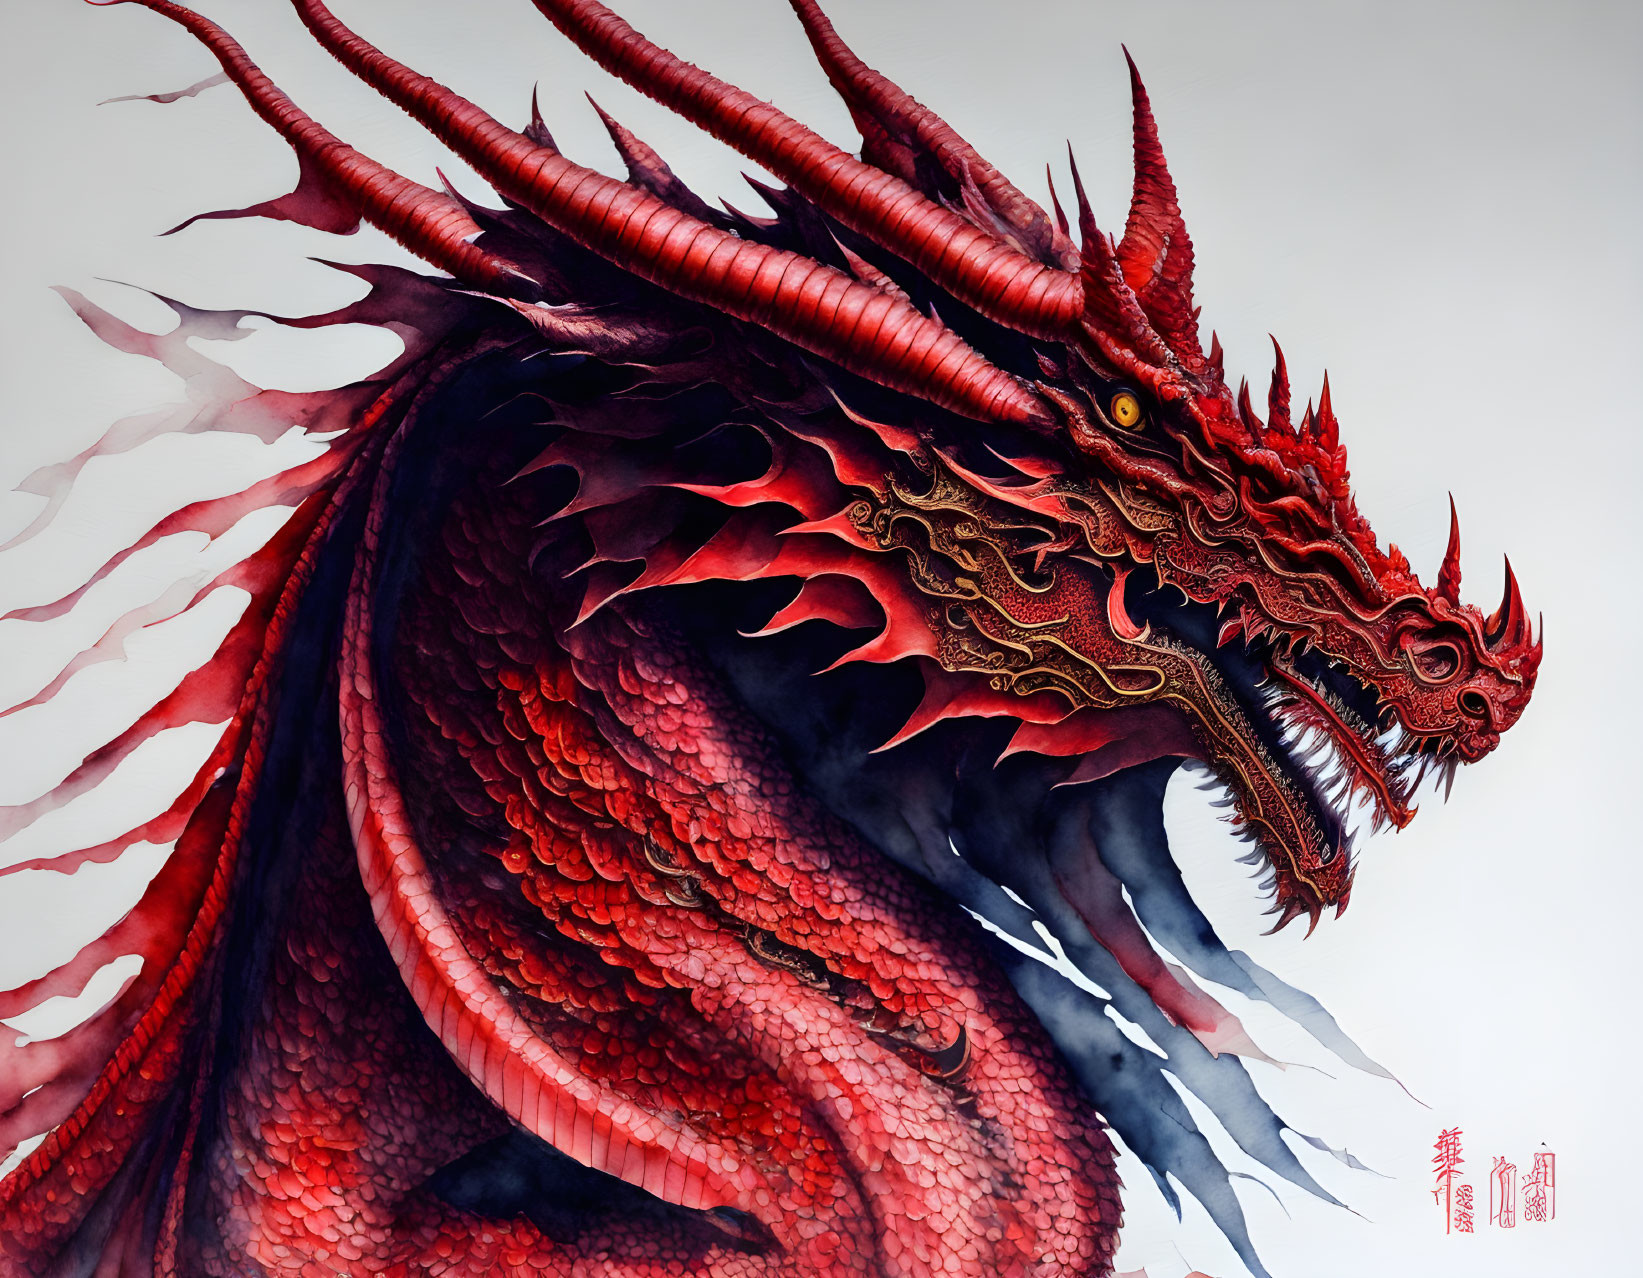 Red Dragon Illustration with Elaborate Horns and Scales